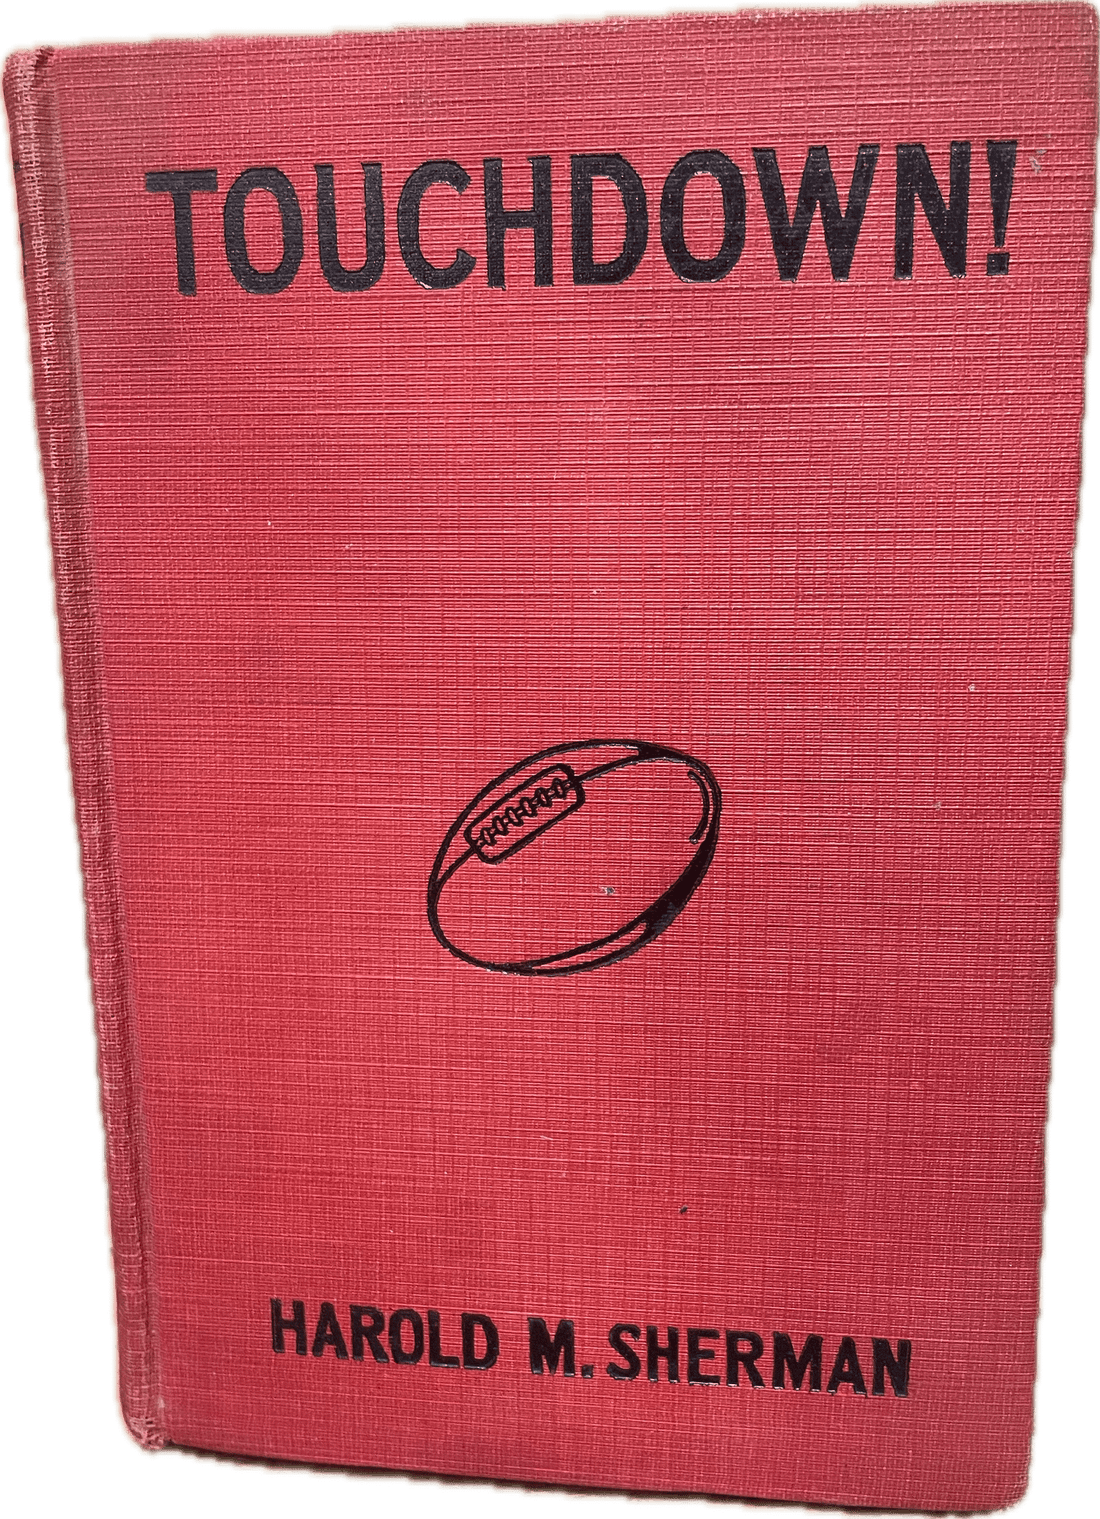 Sports themed Vintage Book - Touchdown